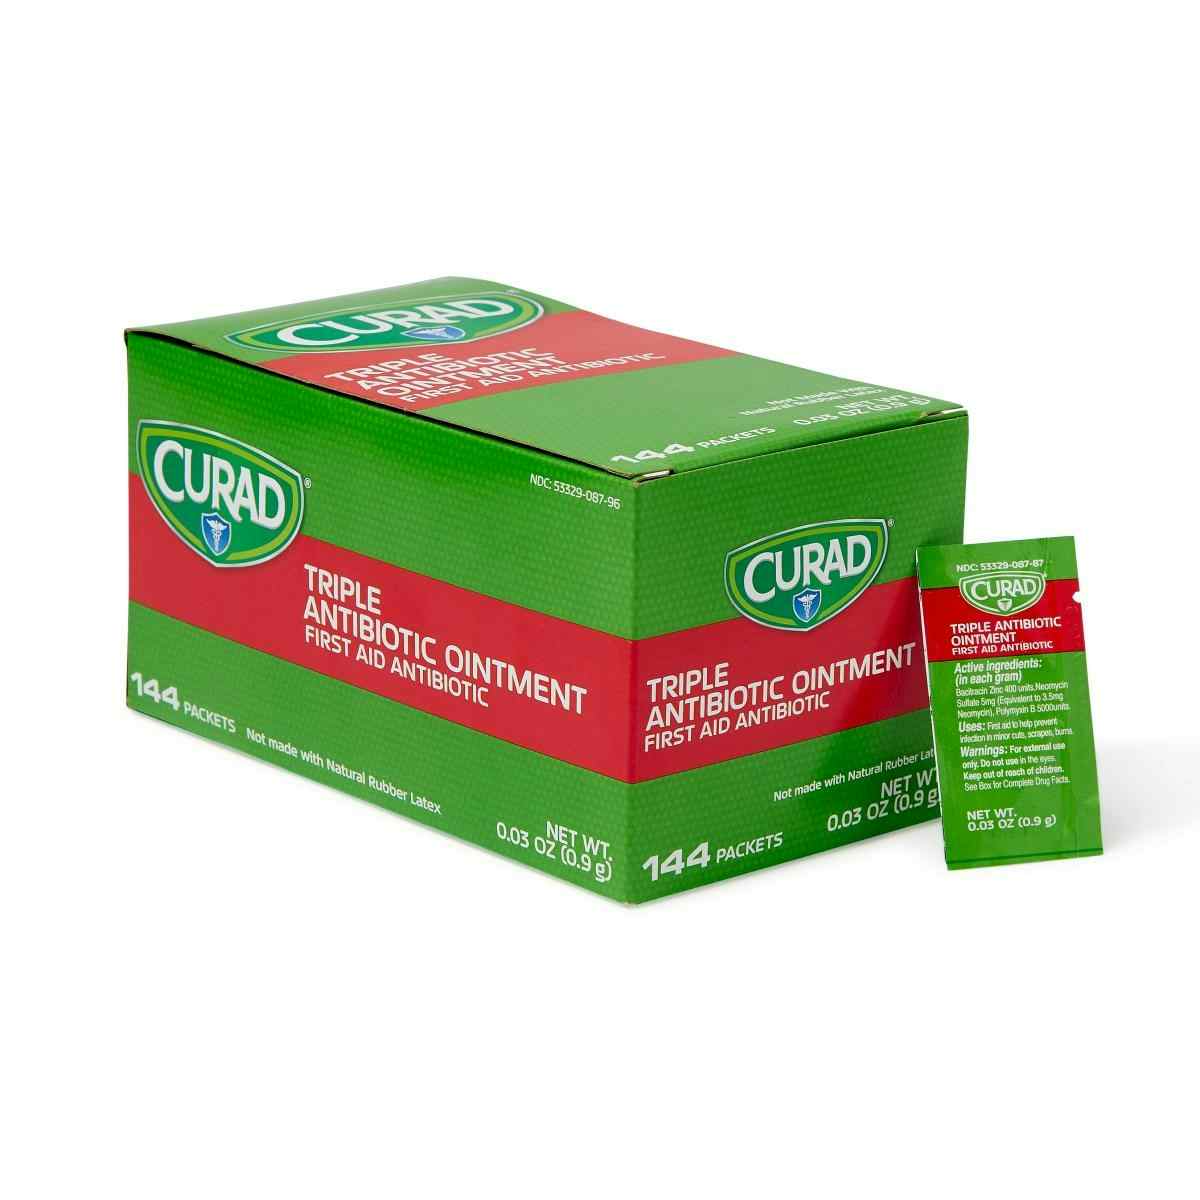 Curad Triple Antibiotic Ointment, CUR001209Z, 0.9g Packets - Box of 144